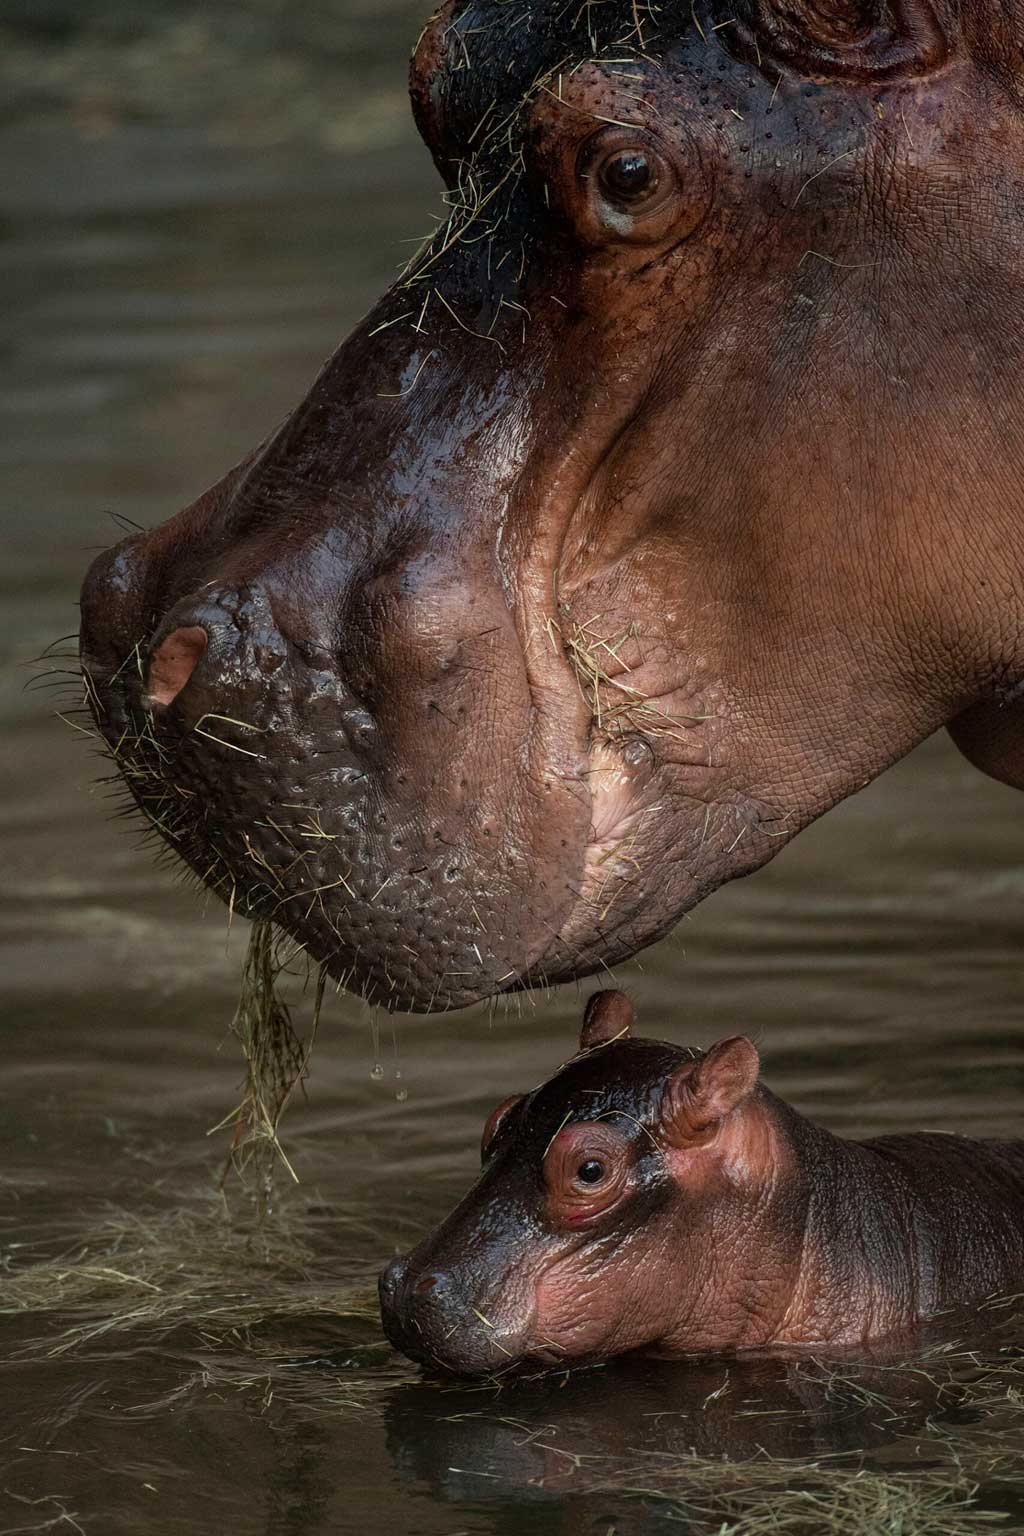 A Nile hippopotamus calf was born July 12, 2021, at Disney’s Animal Kingdom Theme Park at Walt Disney World Resort in Lake Buena Vista, Fla. The calf made a splashy debut in the Safi River on Kilimanjaro Safaris, under the watchful eye of Disney’s animal care team. So far, the healthy calf is nuzzling with mom, Tuma, and moving through the water like a pro. The team is giving Tuma and her newborn ample time to nurse and bond, so the calf’s gender and weight might not be known for some time; a newborn hippo can weigh between 60 and 110 pounds. This birth marks the 10th hippo currently in Disney care. (David Roark, photographer)